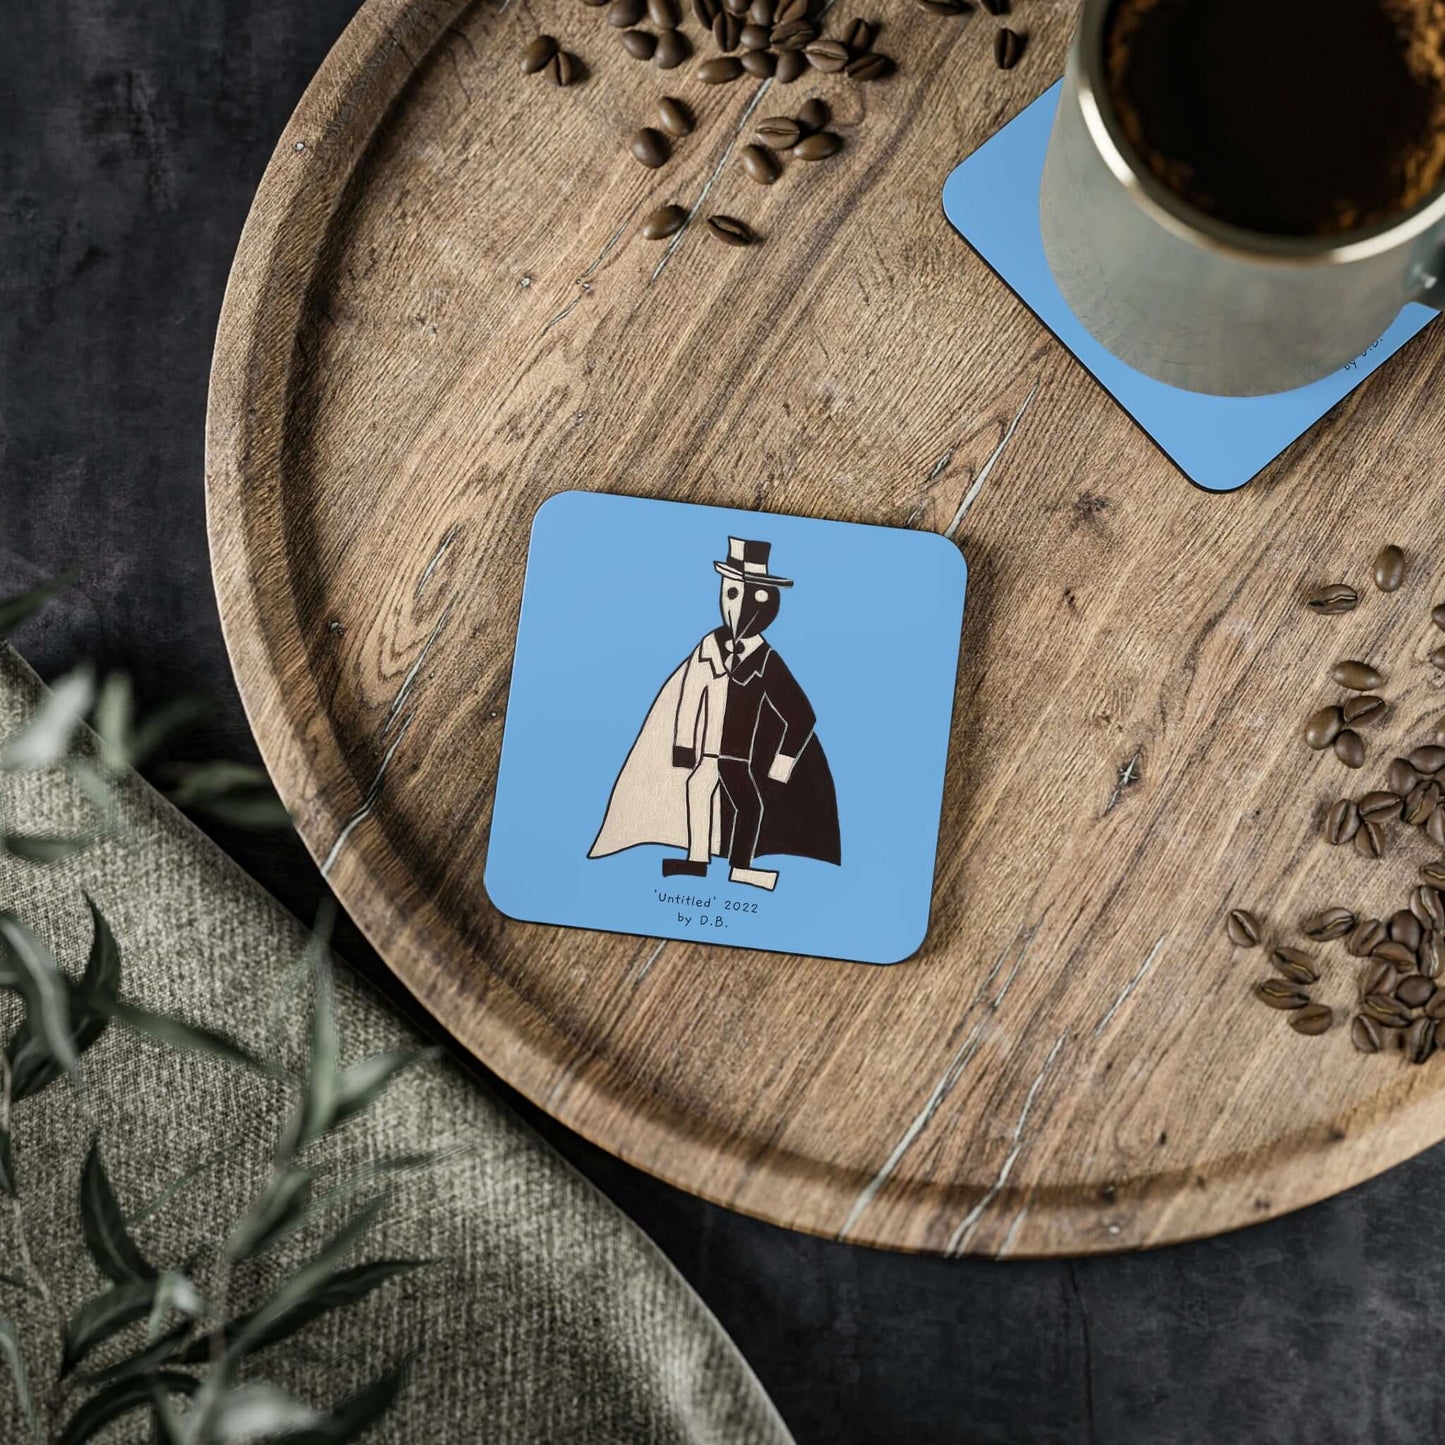 'Untitled' 2022 by D.B. printed on Stylish Drink Coasters